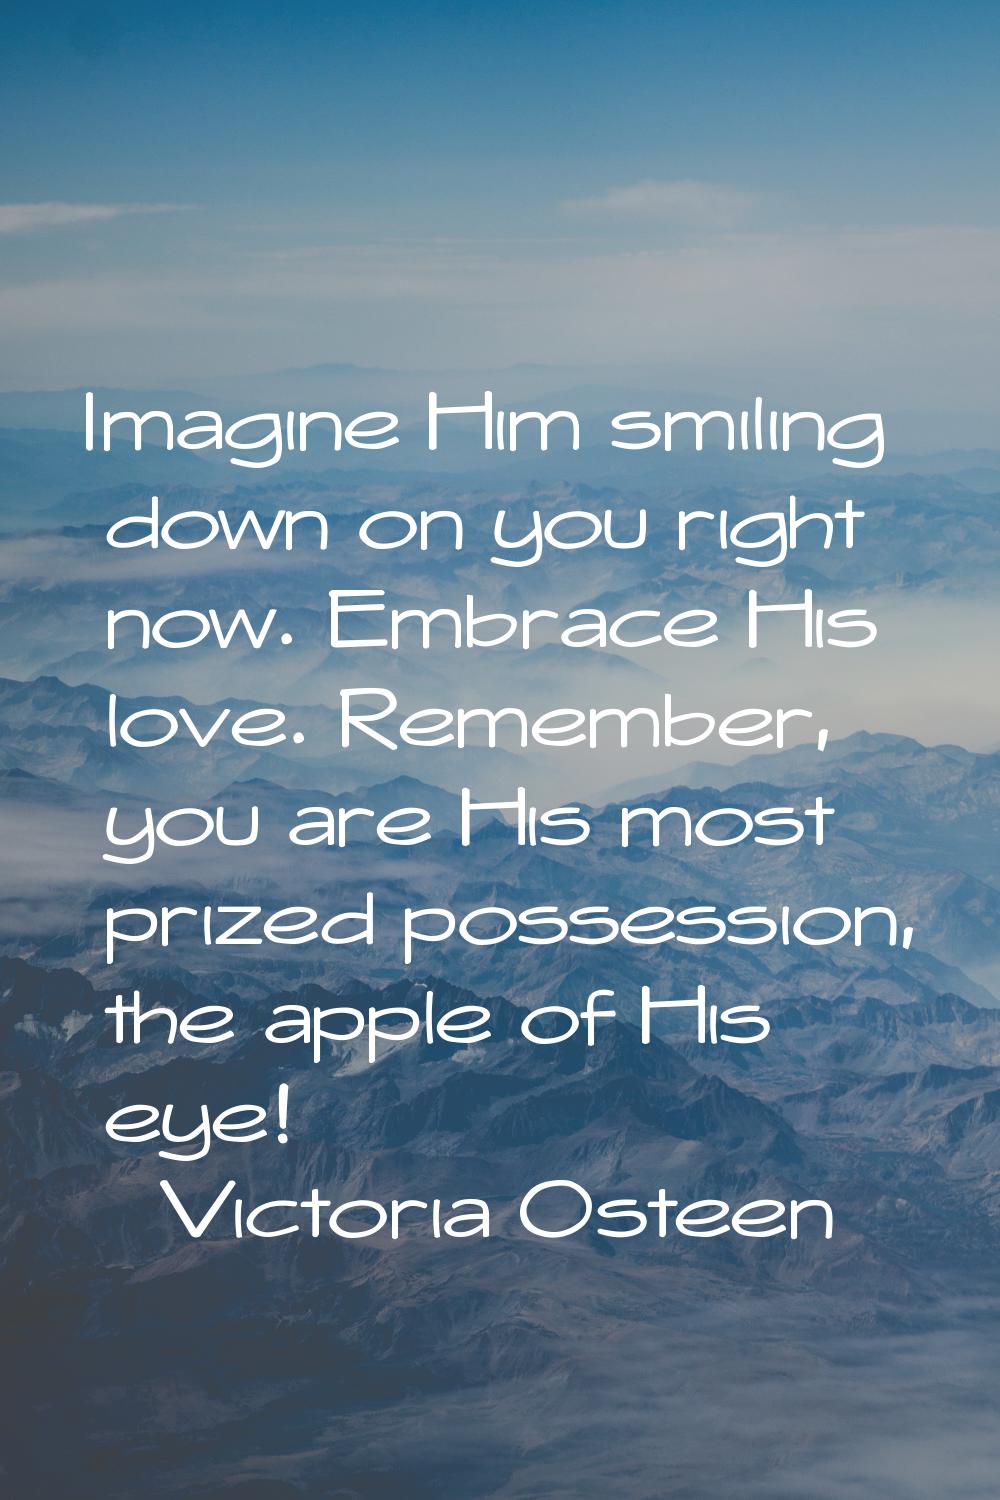 Imagine Him smiling down on you right now. Embrace His love. Remember, you are His most prized poss